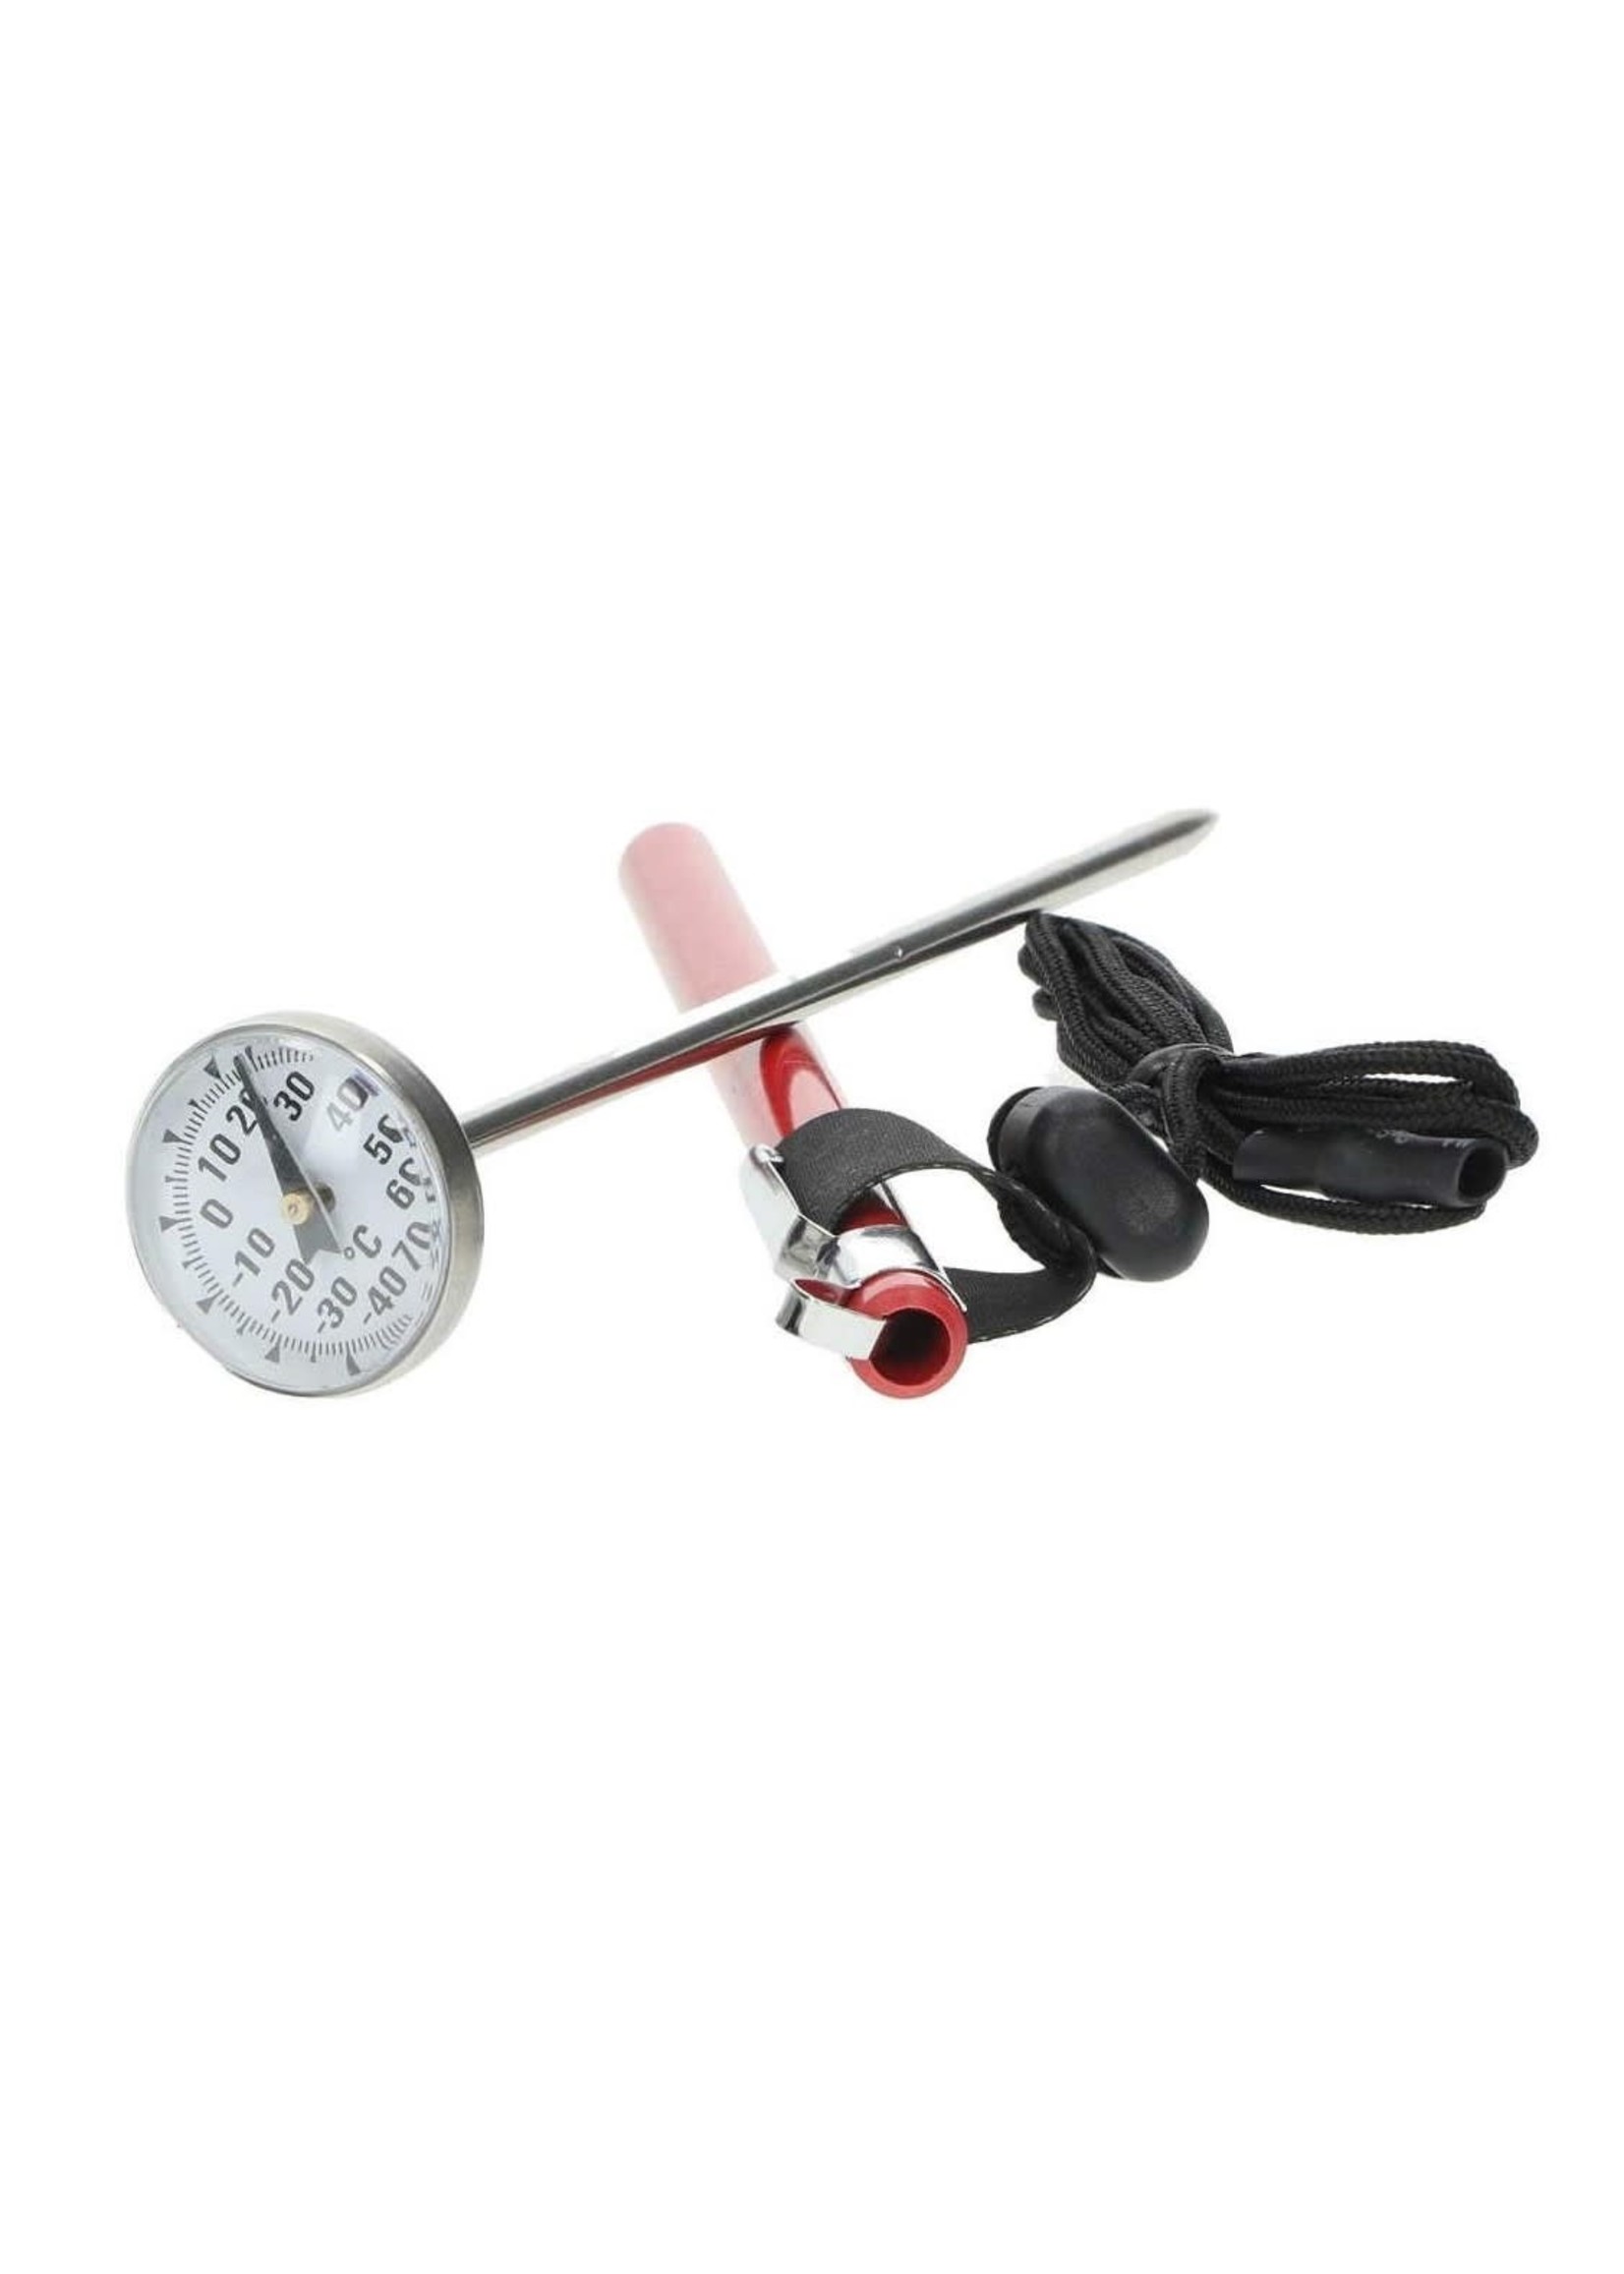 Backcountry Access BCA Analog Thermometer